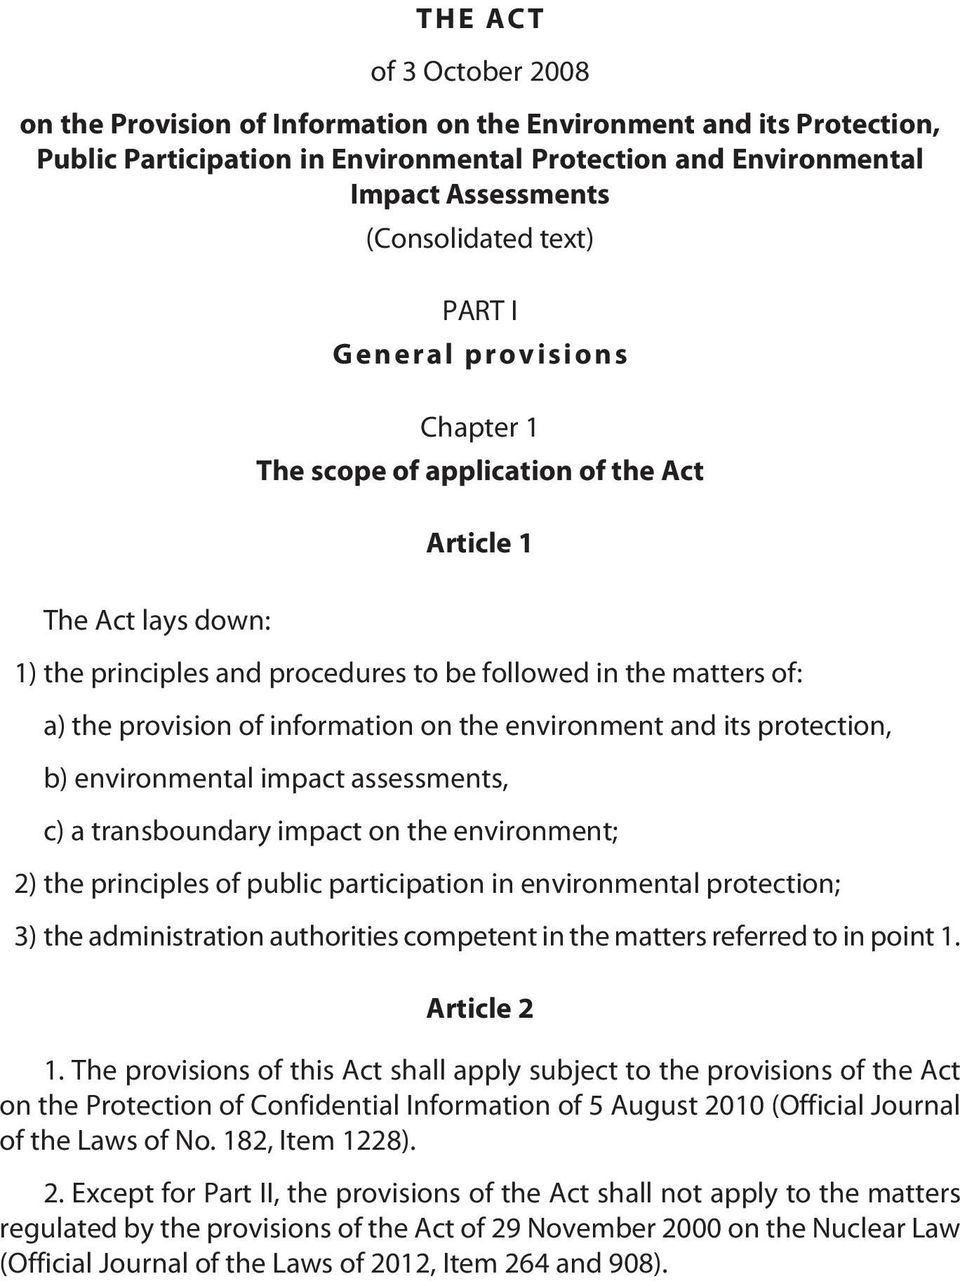 information on the environment and its protection, b) environmental impact assessments, c) a transboundary impact on the environment; 2) the principles of public participation in environmental